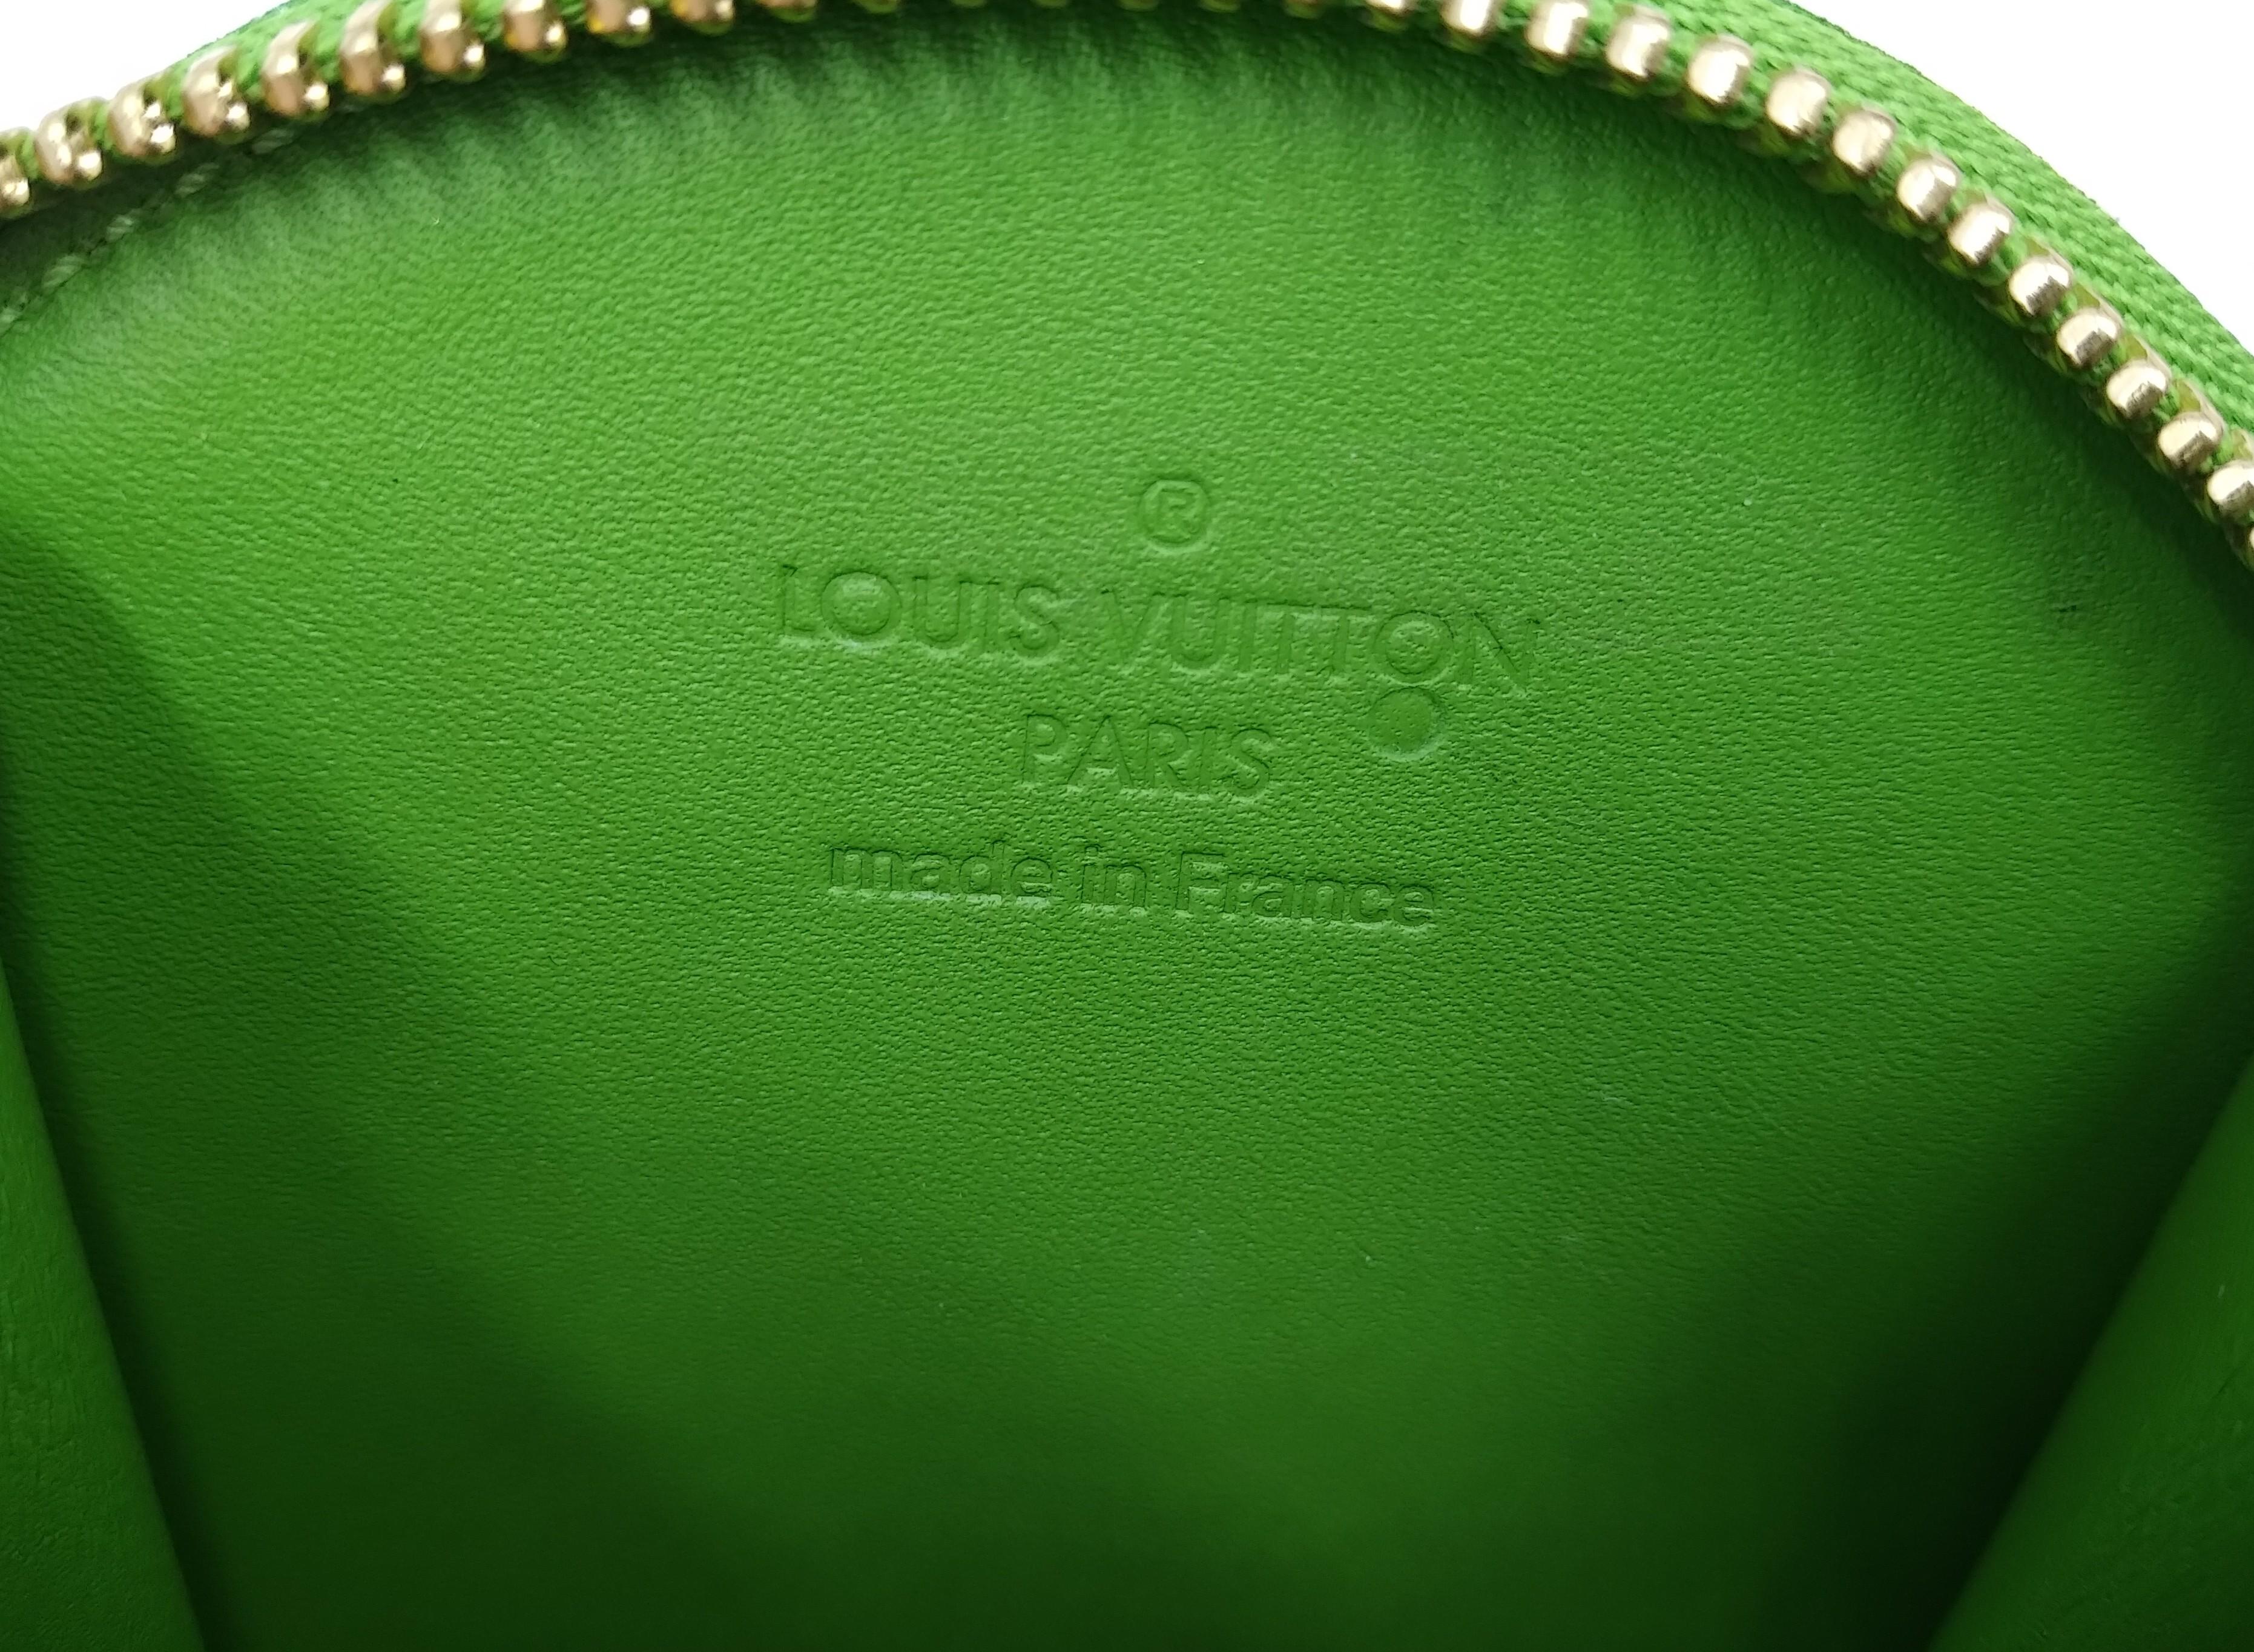 Louis Vuitton Limited Edition Stephen Sprouse Monogram Green Vernis Roses Coin  For Sale 2